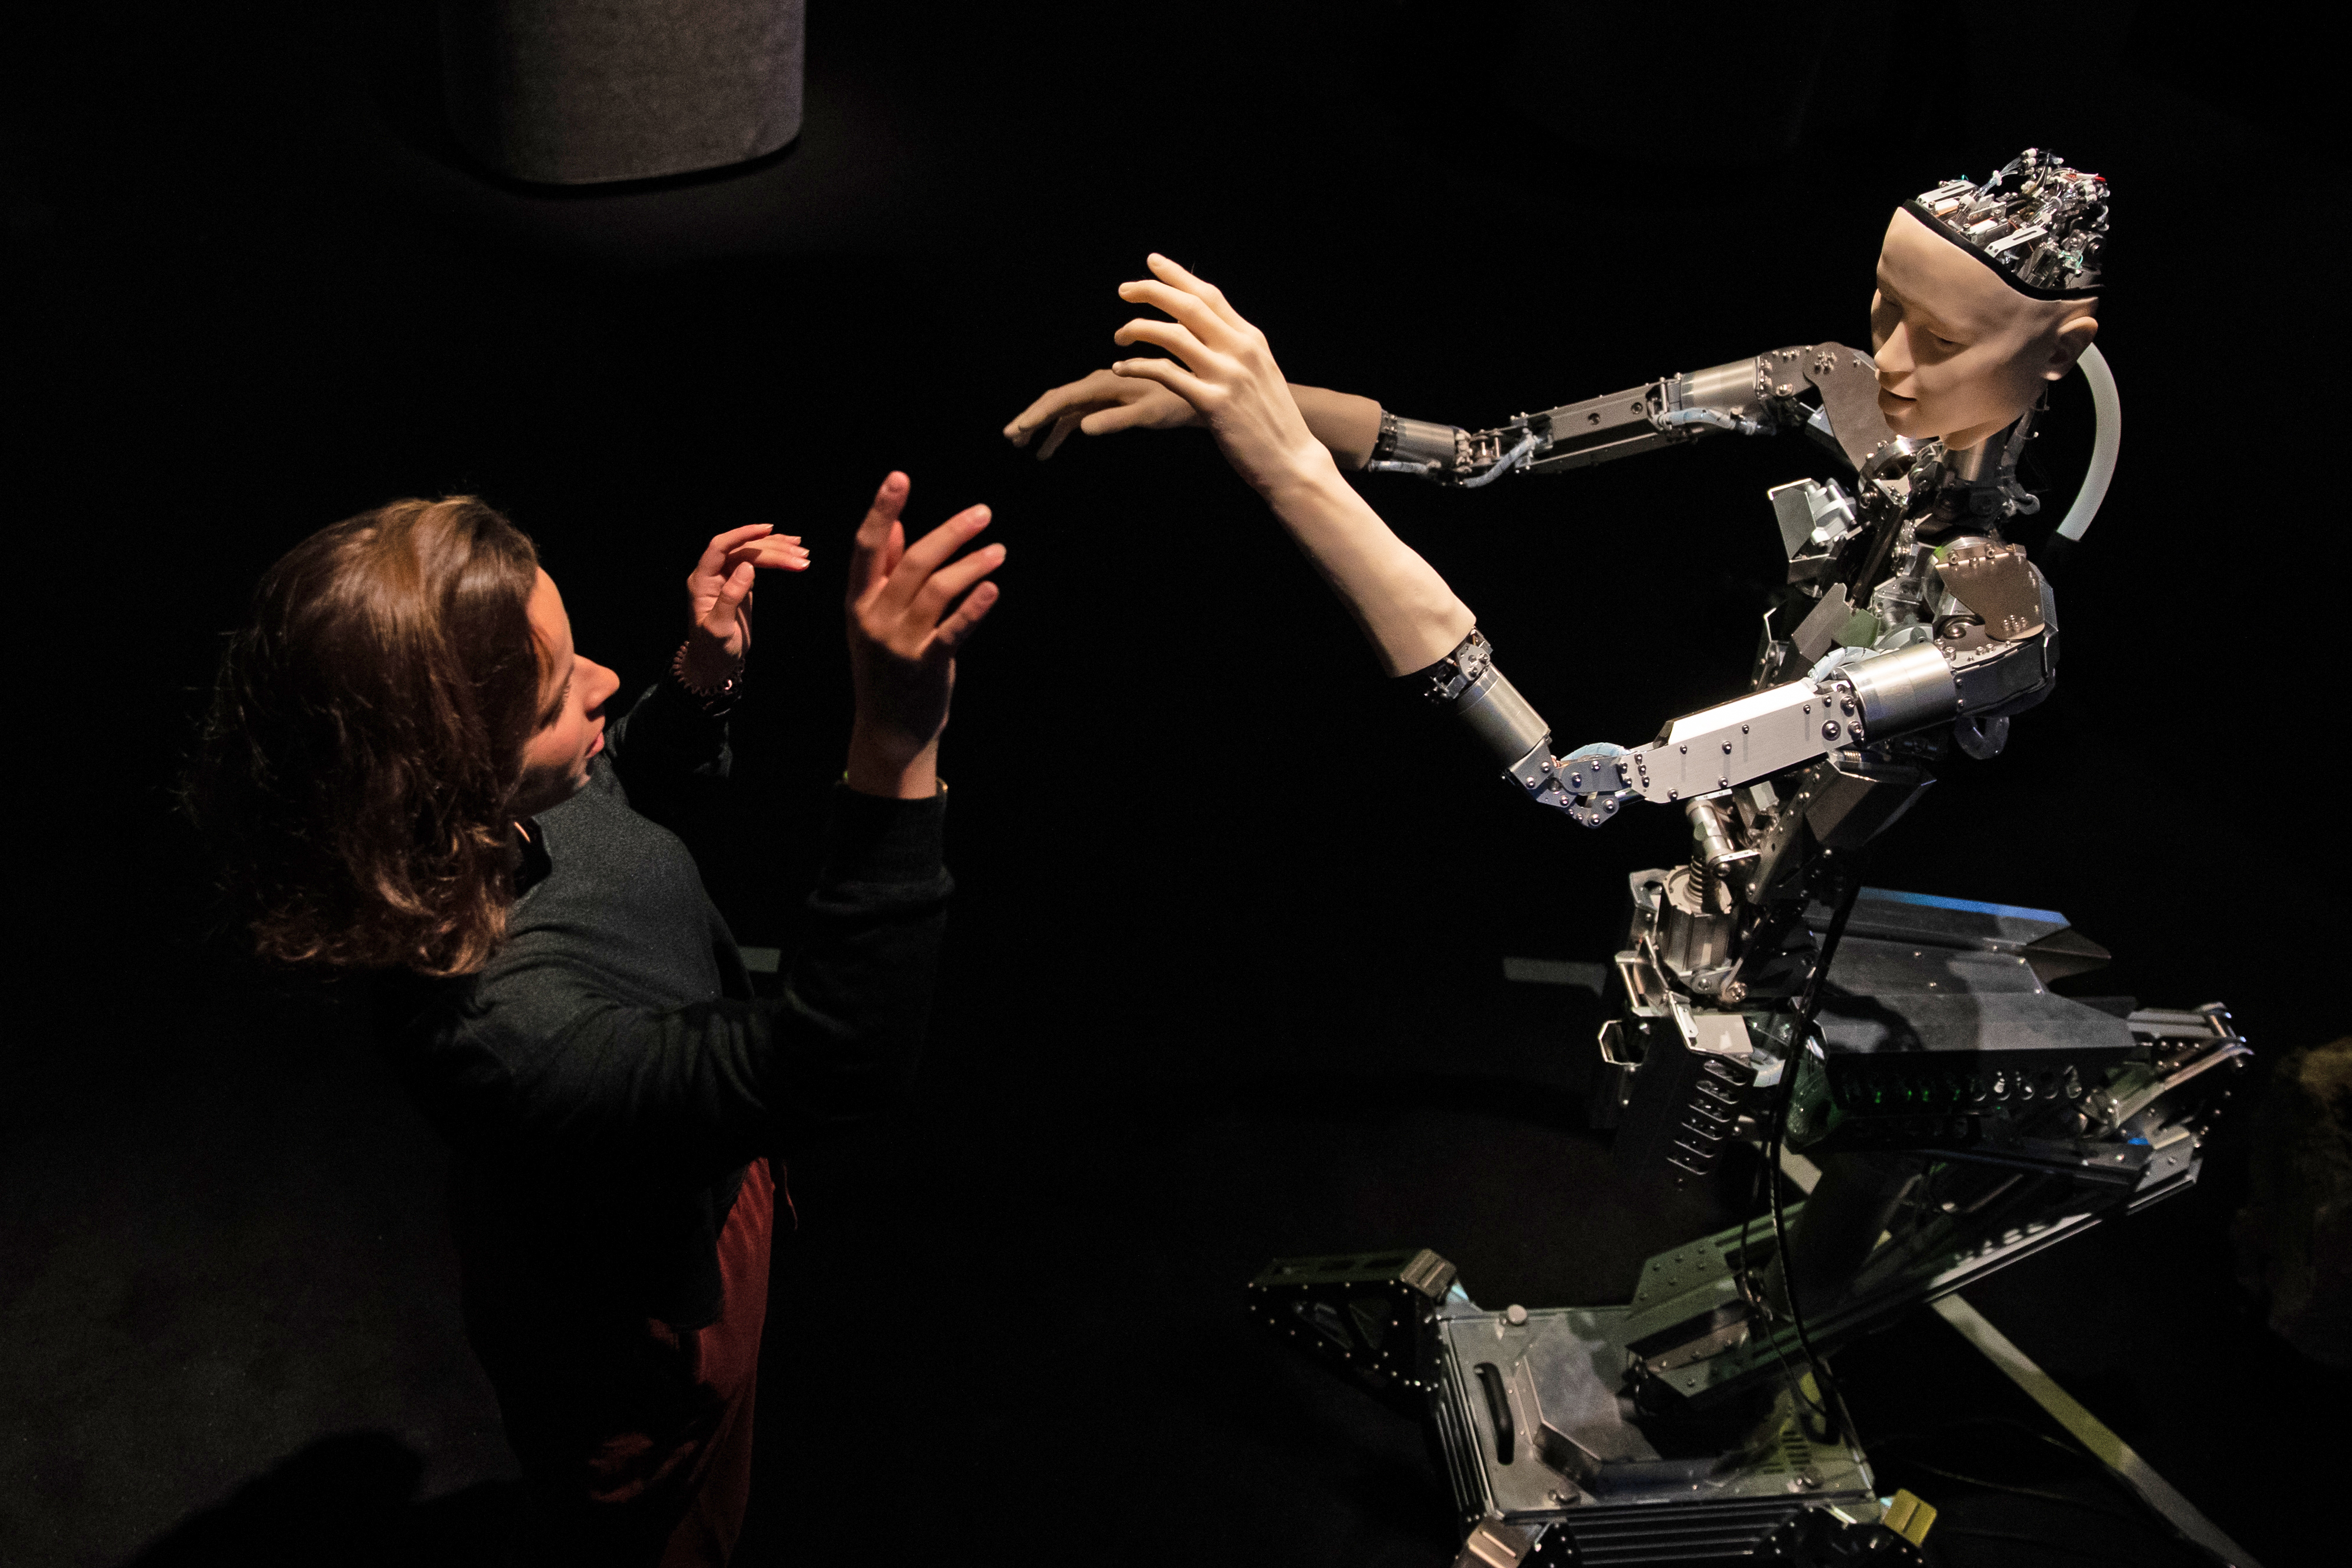 A women interacts with 'Alter', a machine body with a human like face and hands who learns through interplaying with the surrounding world. Alter was created by roboticist Hiroshi Ishiguro and is on display at the 'AI: More Than Human' exhibition at the Barbican Centre in London. The major new exhibition explores the relationship between humans and artificial intelligence.